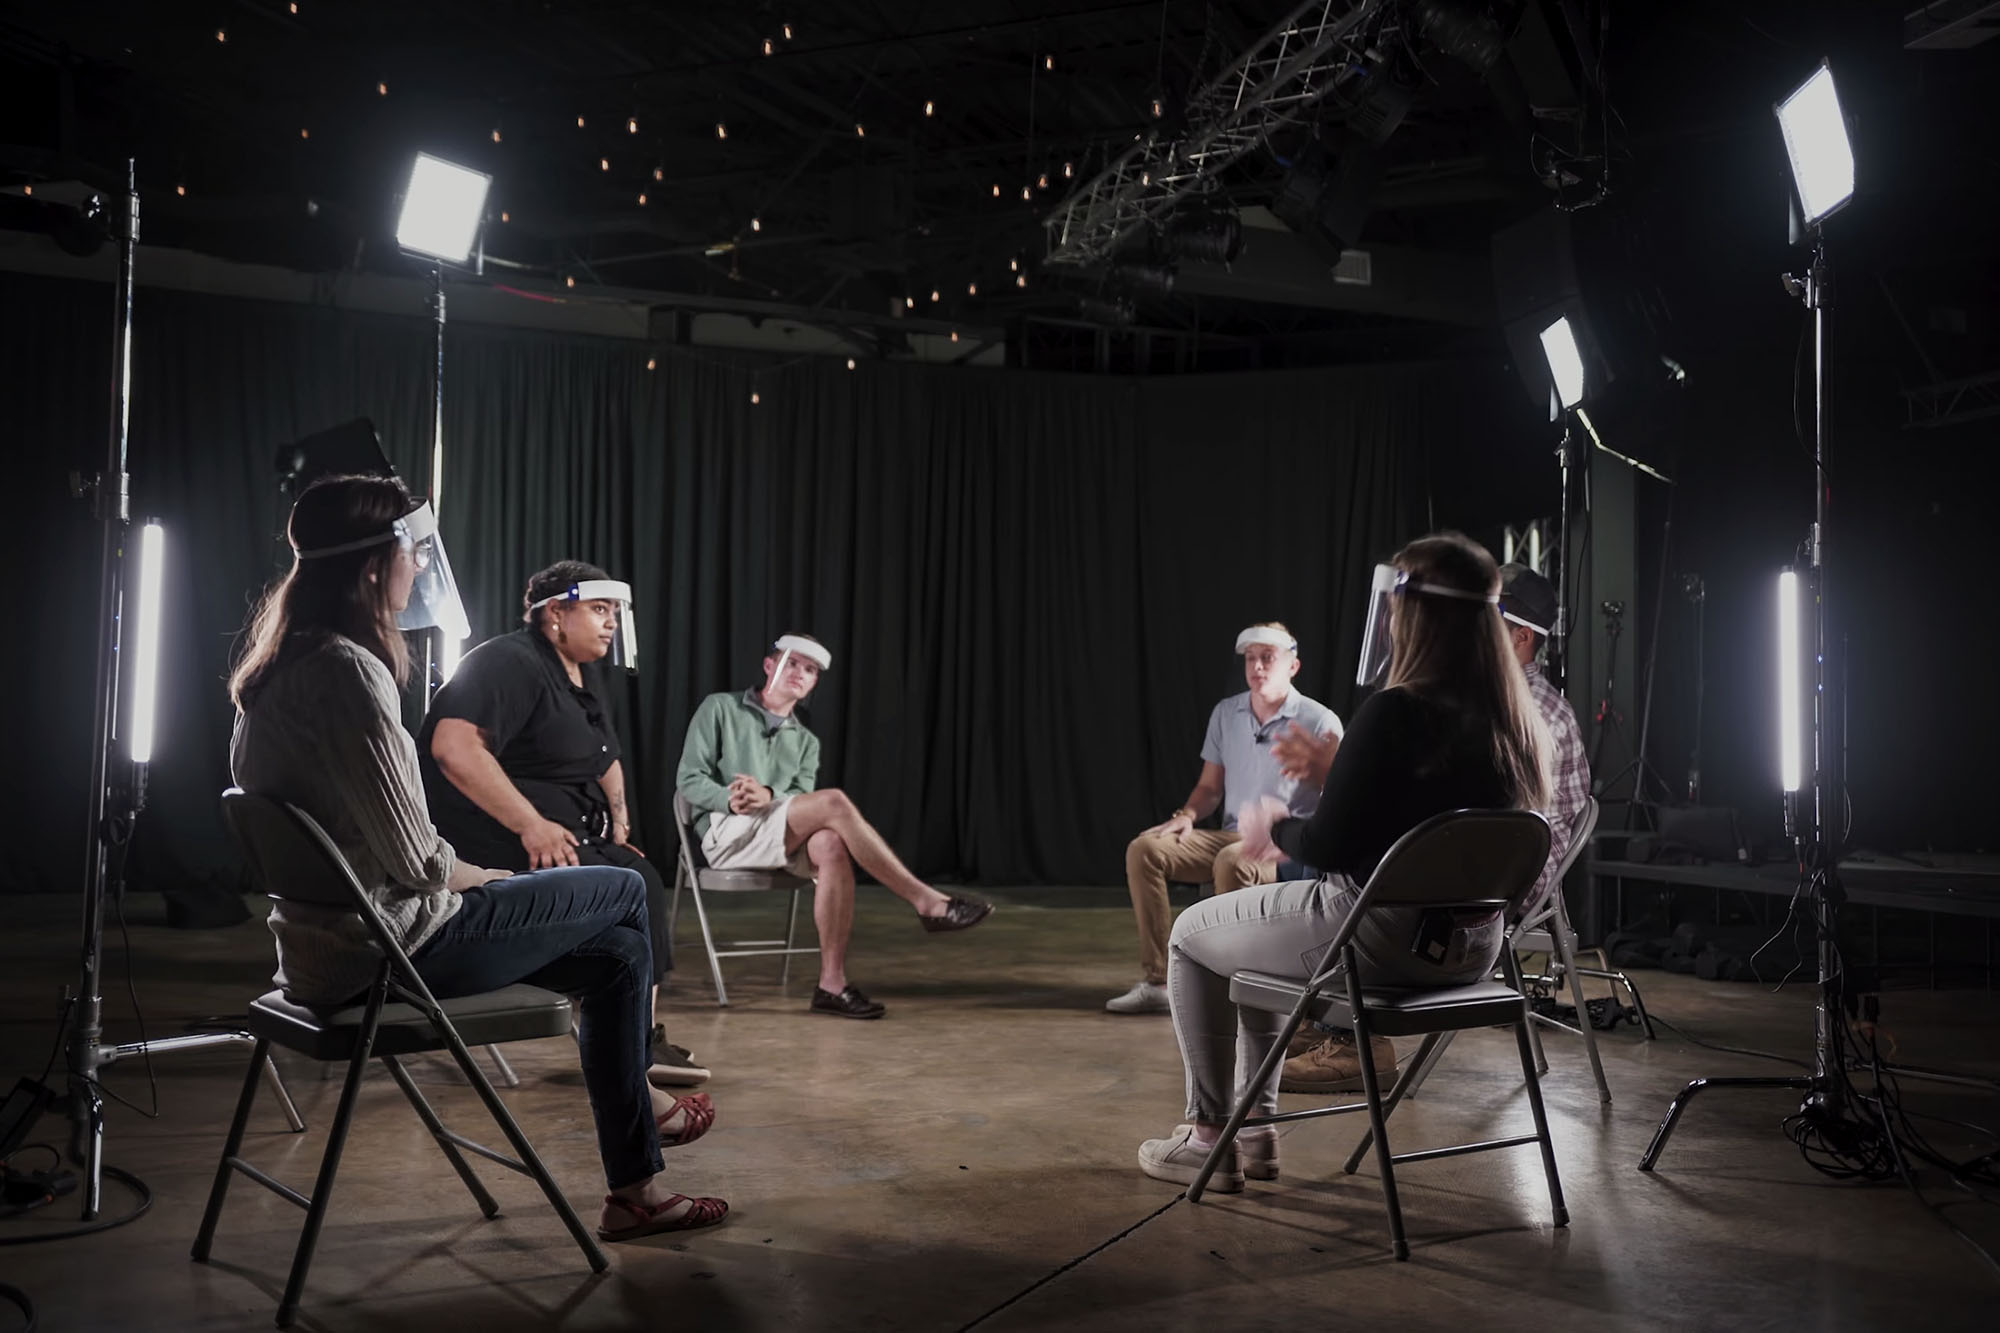 Group of people sitting in metal chairs talking to each other with bright lights for filming